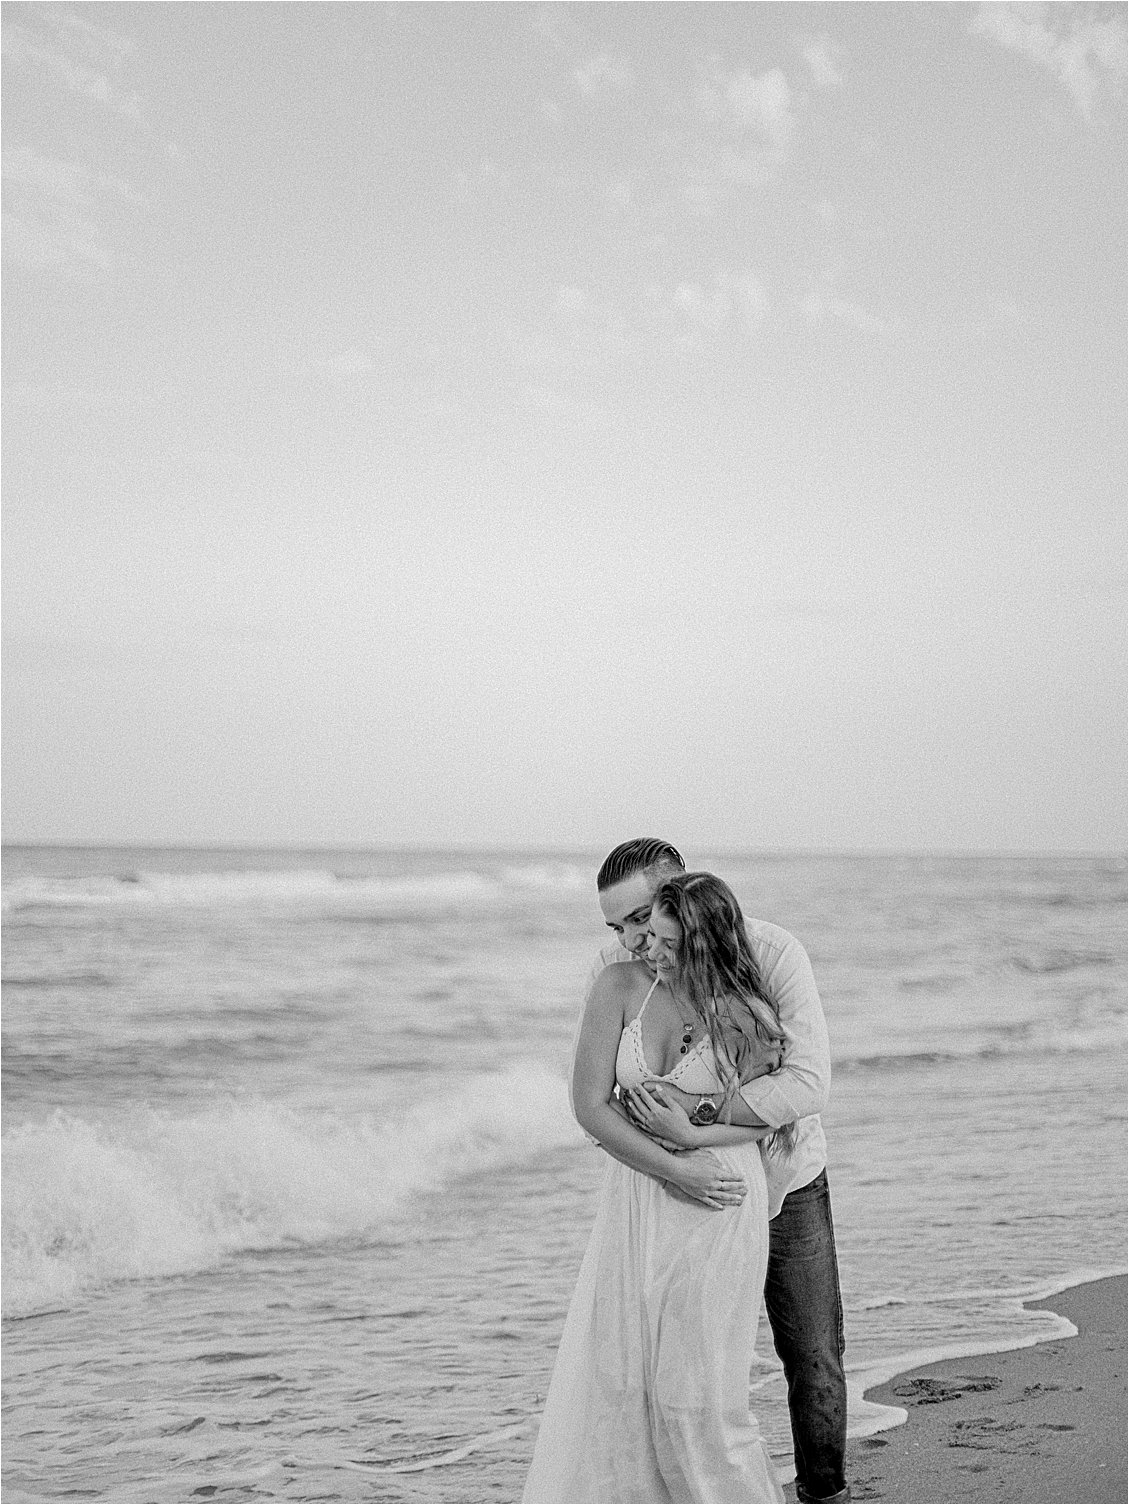 Palm Beach Engagement Session at Sunset with Destination Film Wedding Photographer, Renee Hollingshead